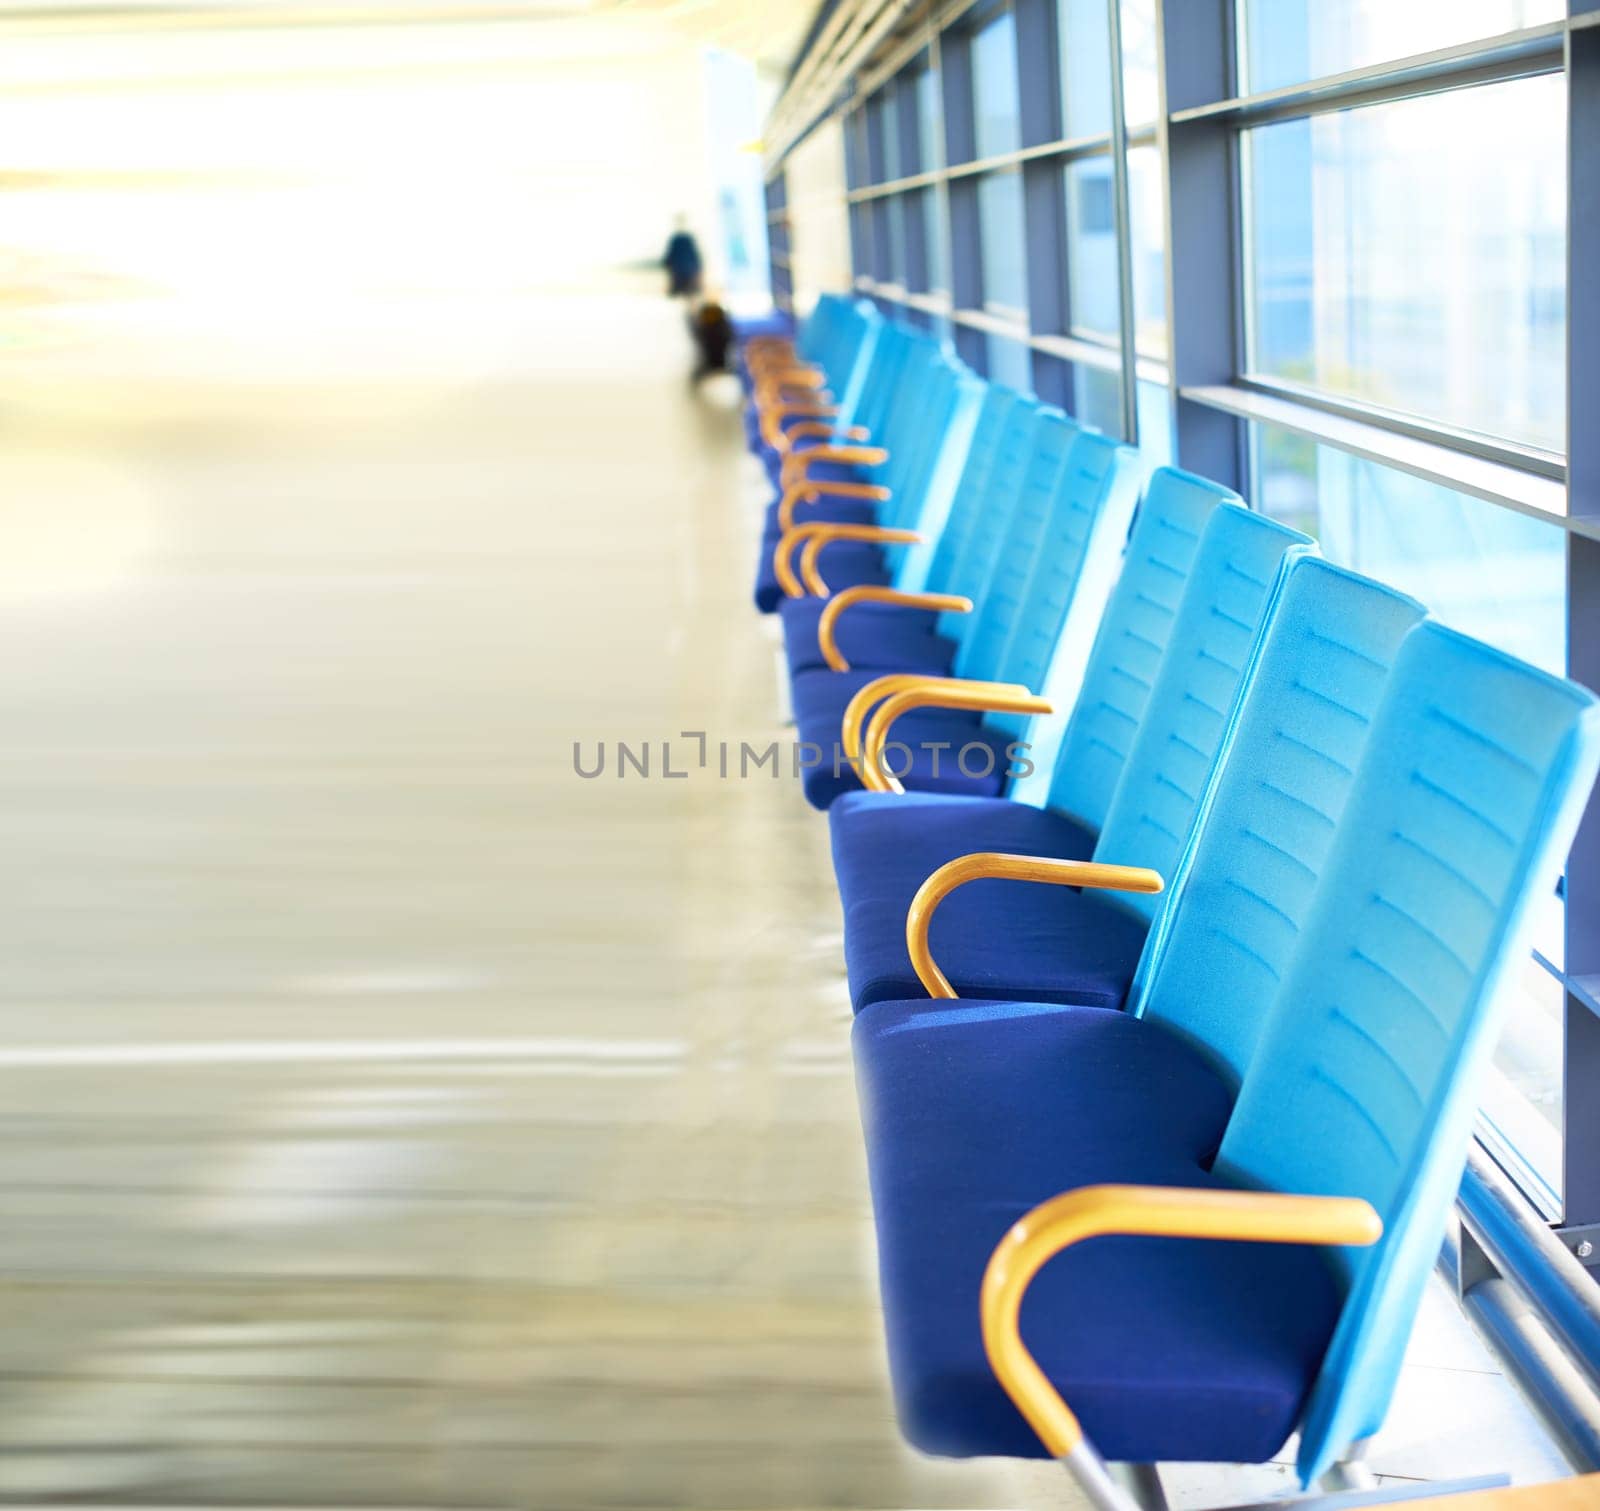 Chair, row and interior in airport for travel, aircraft and flight in building with design in futuristic architecture. Modern, urban and editorial with walls for movement, destination and travelers.